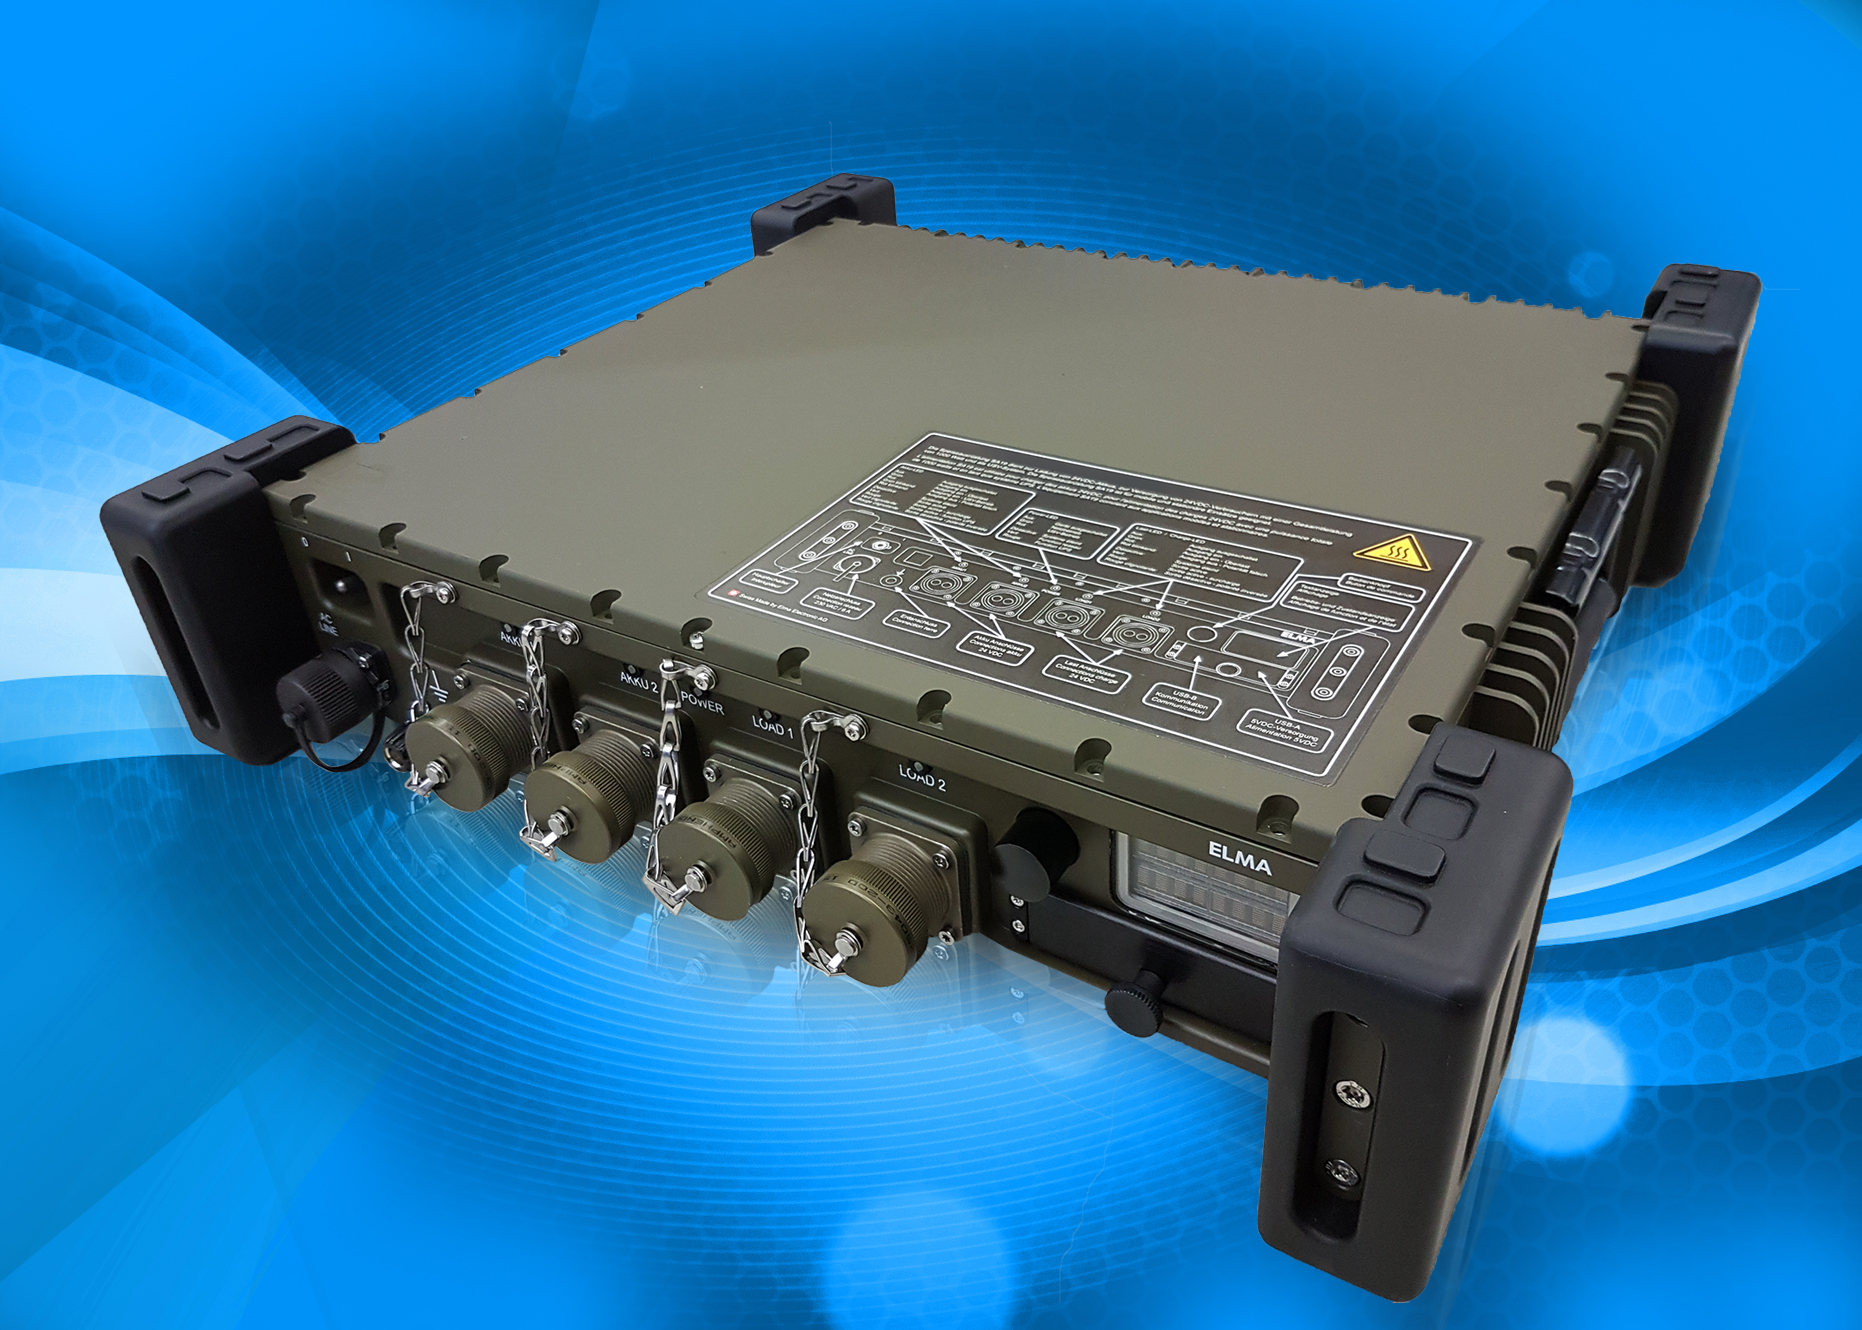 Rugged Power System for Reliable Charging in Remote Areas